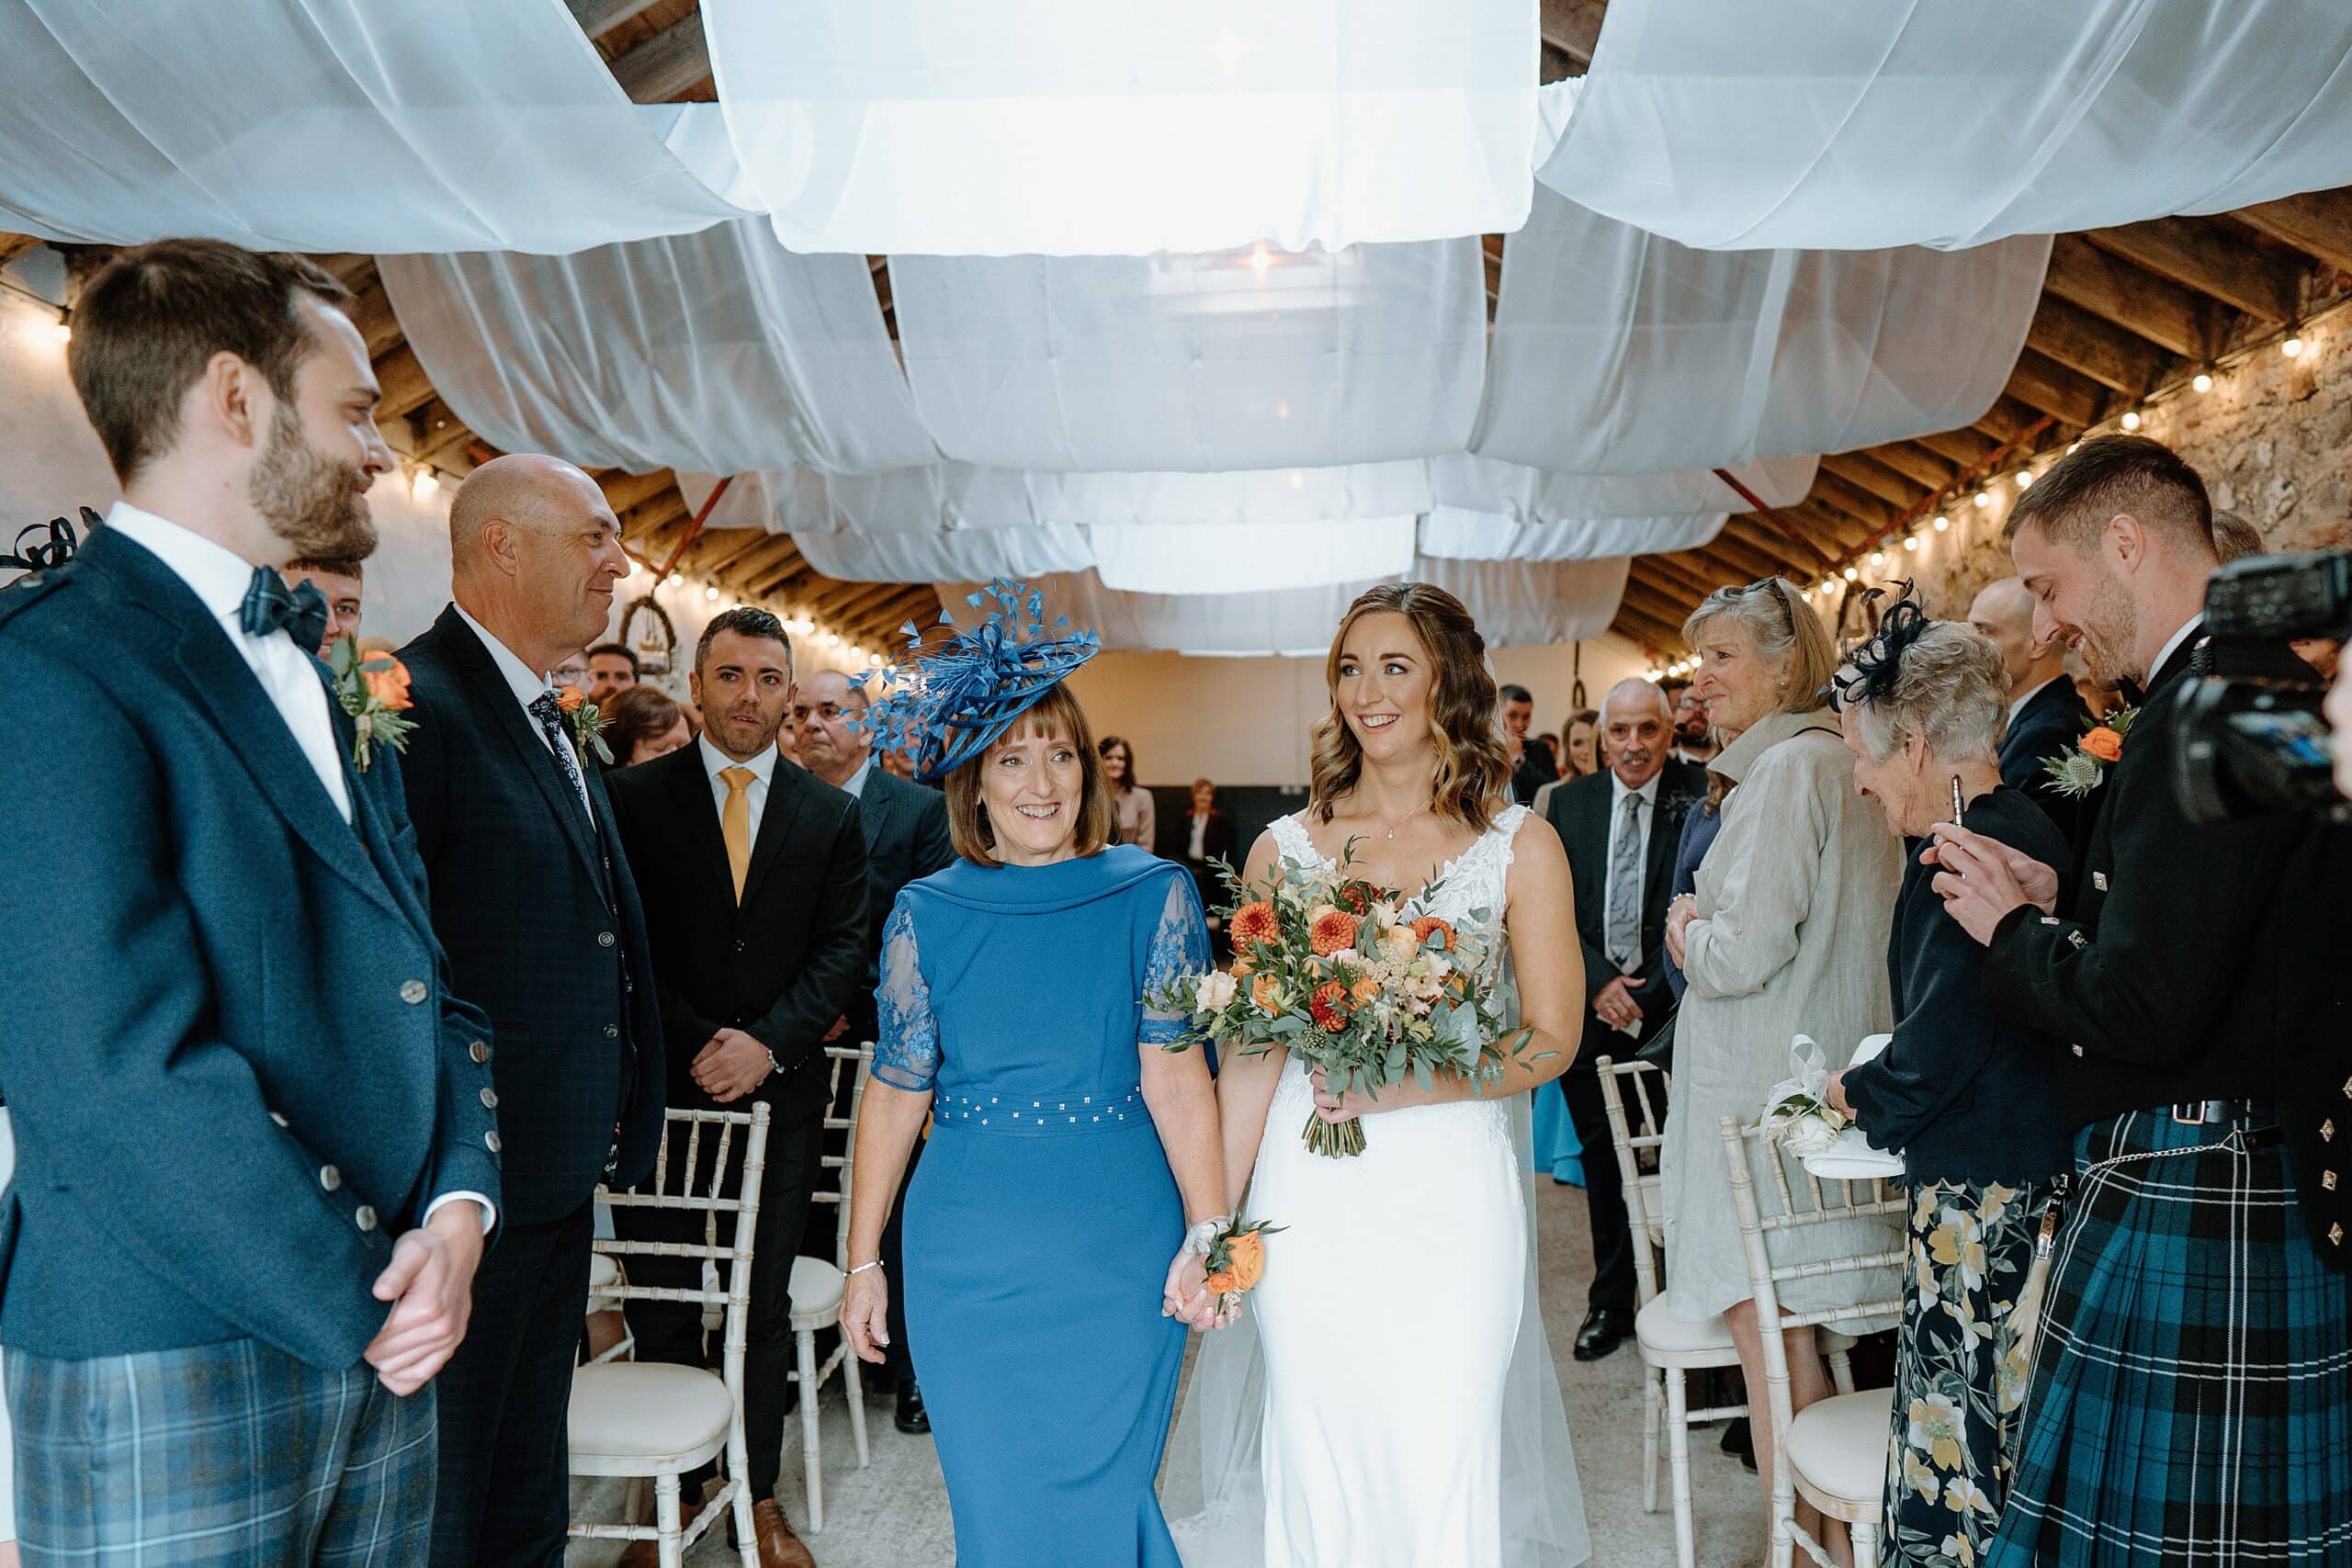 the bride and mother of the bride walk up the aisle beneath white drapes hanging from the ceiling inside the wedding byre at harelaw farm wedding barn venue fenwick scotland